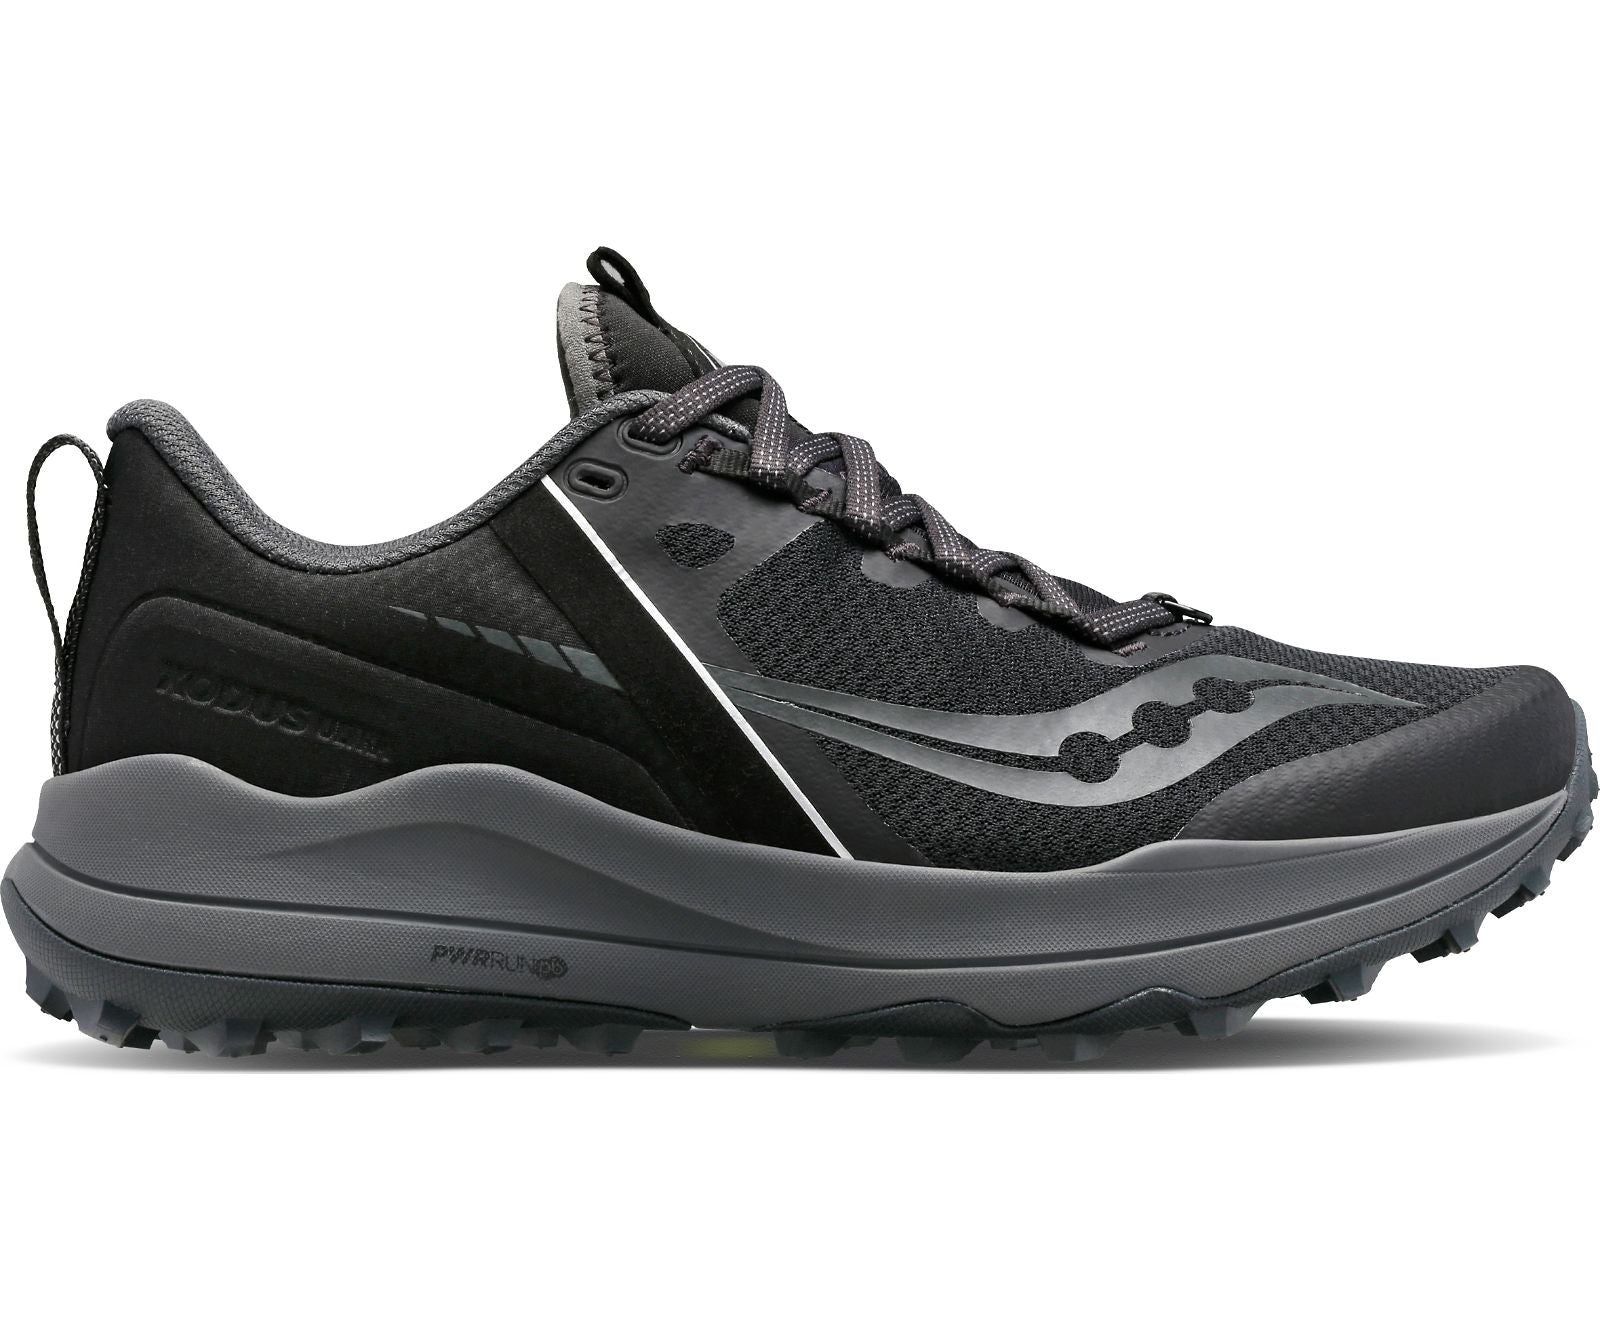 Lateral view of the Women's Xodus Ultra trail shoe by Saucony in the color Black/Charcoal